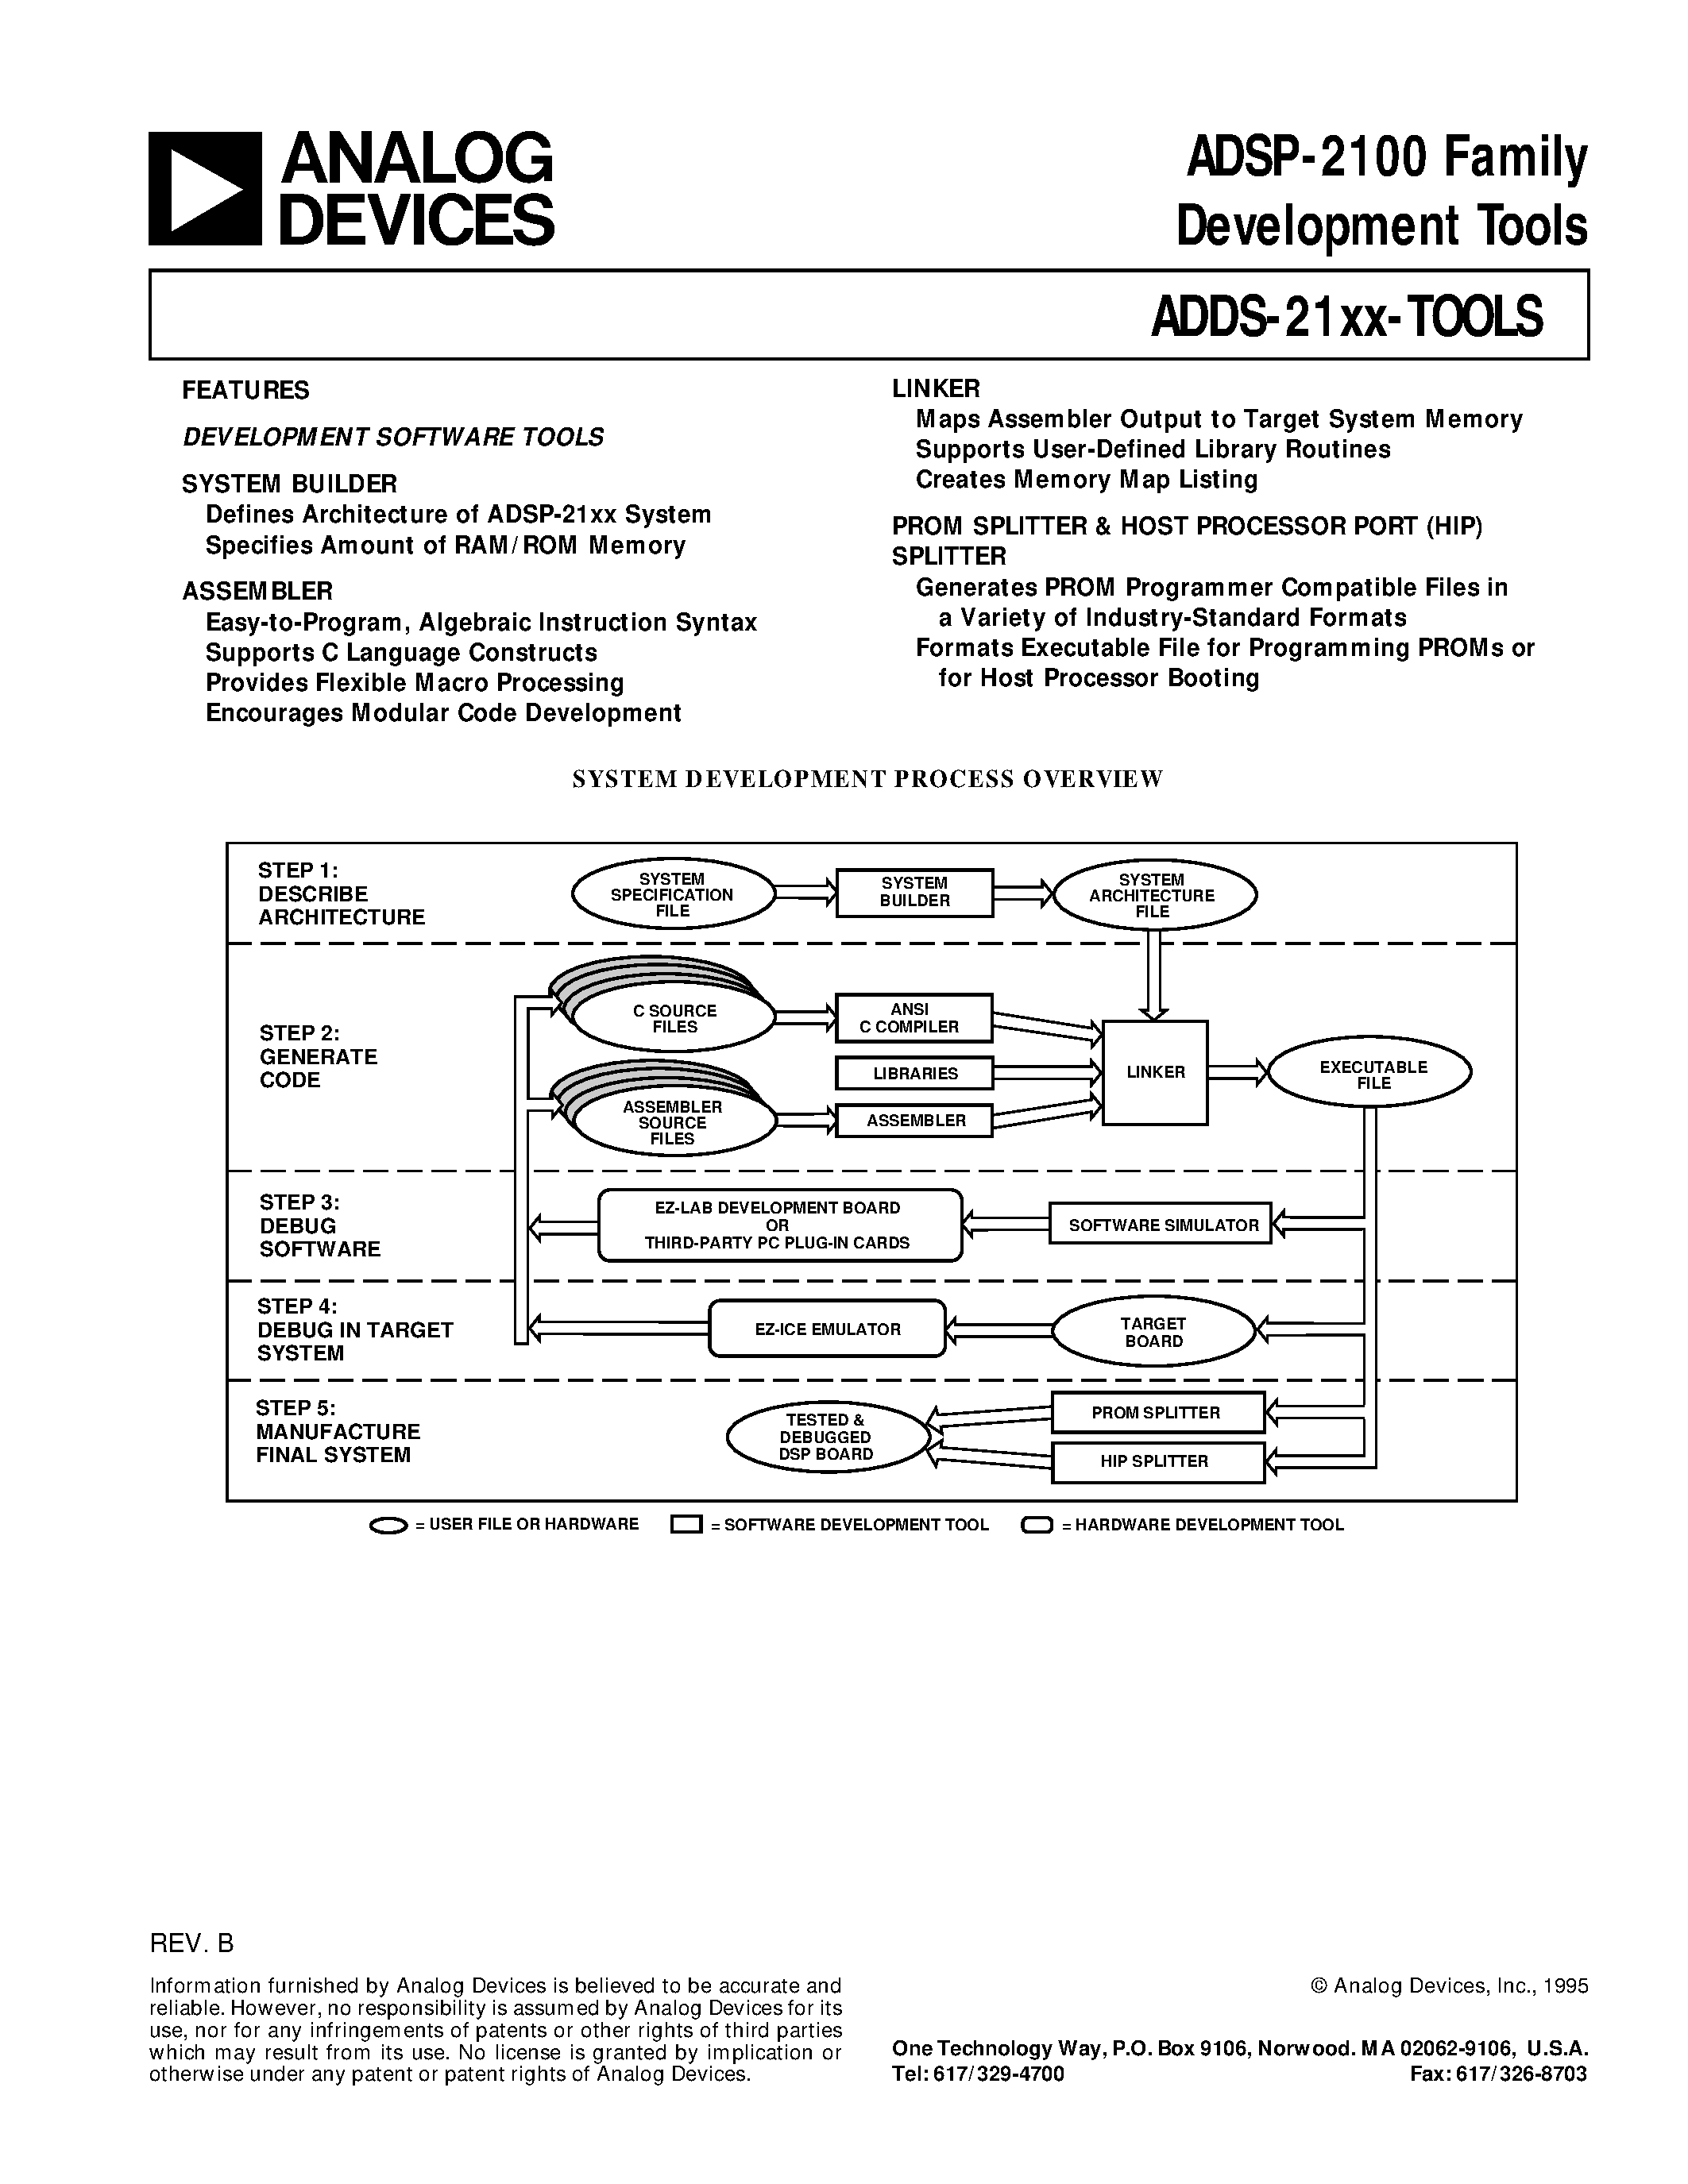 Datasheet ADDS-2101-EZ-ICE - ADSP-2100 Family Development Tools page 1